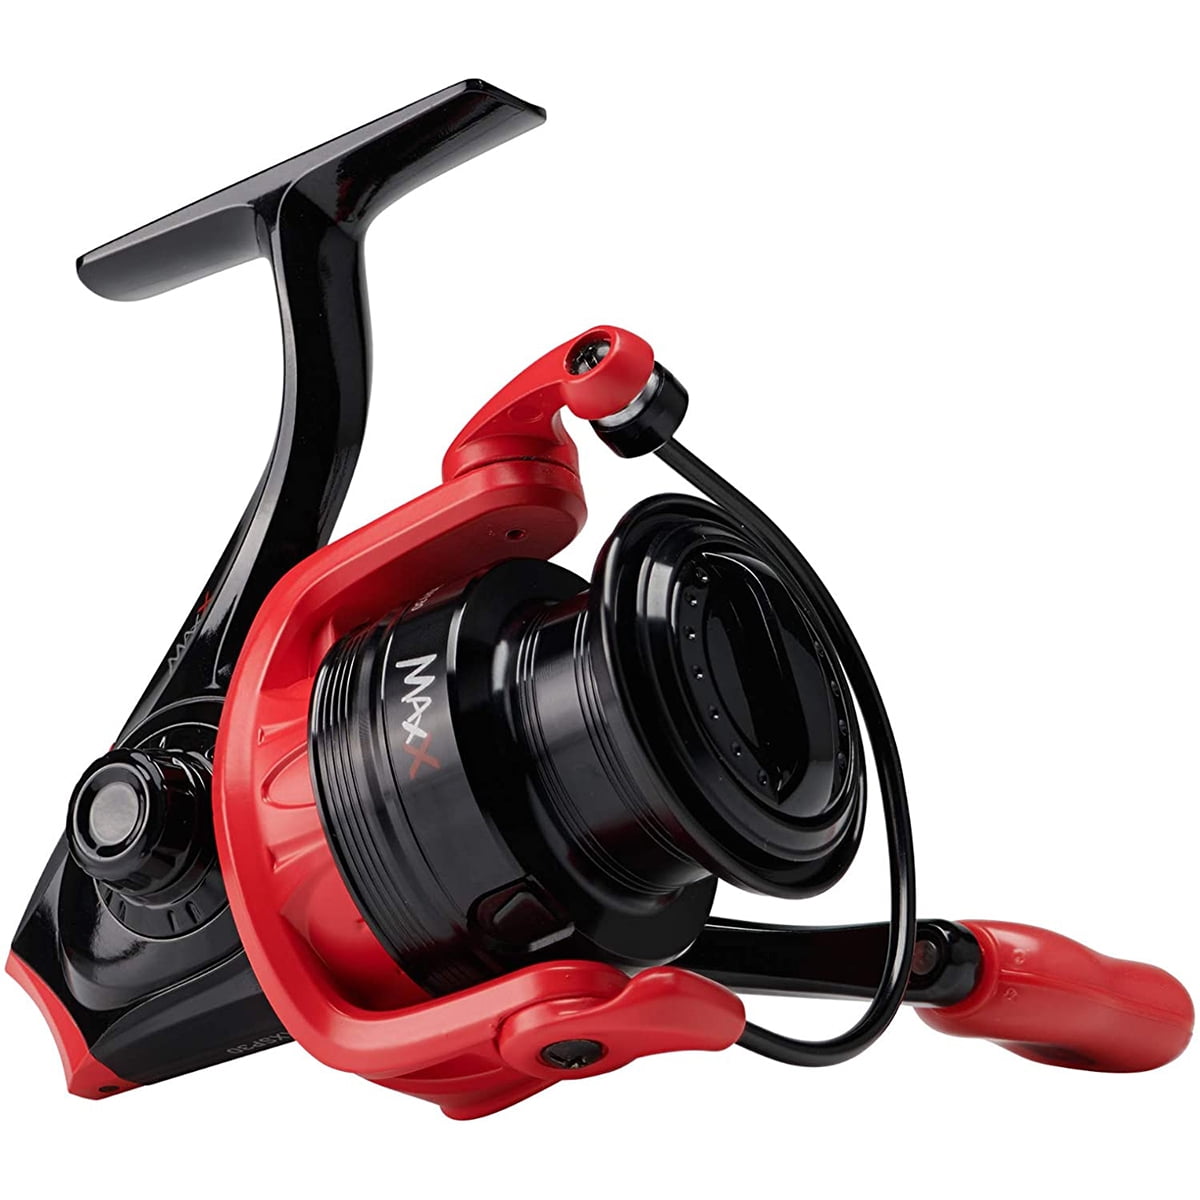 Lew's Crappie Thunder Spincast Fishing Reel, 4.3:1 Gear Ratio